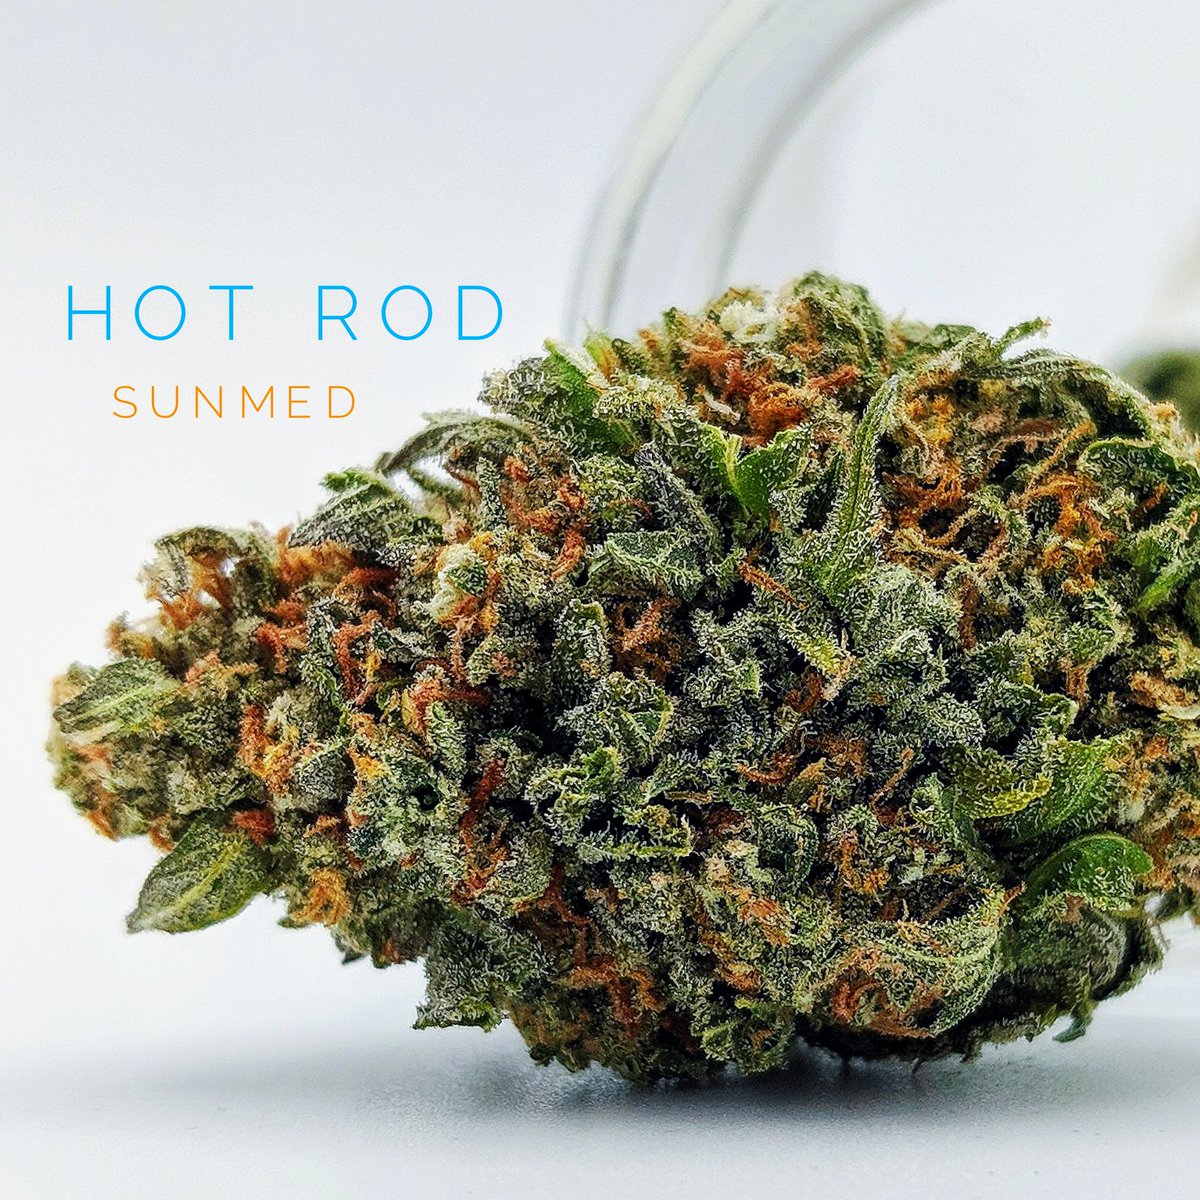 A Wild Ride with HOT ROD 🔥🌿 Powerful Indica Experience from SunMed 🌄 Growers Motorbreath x Grandpa's Breath 🌿 Medicine From The 🌞 Sun - Hits Hard and Lingers Awhile 👌 26% Total Cannabinoids #MedicalMarijuana #medicalcannabis 18+ and MD Patient Card Holder